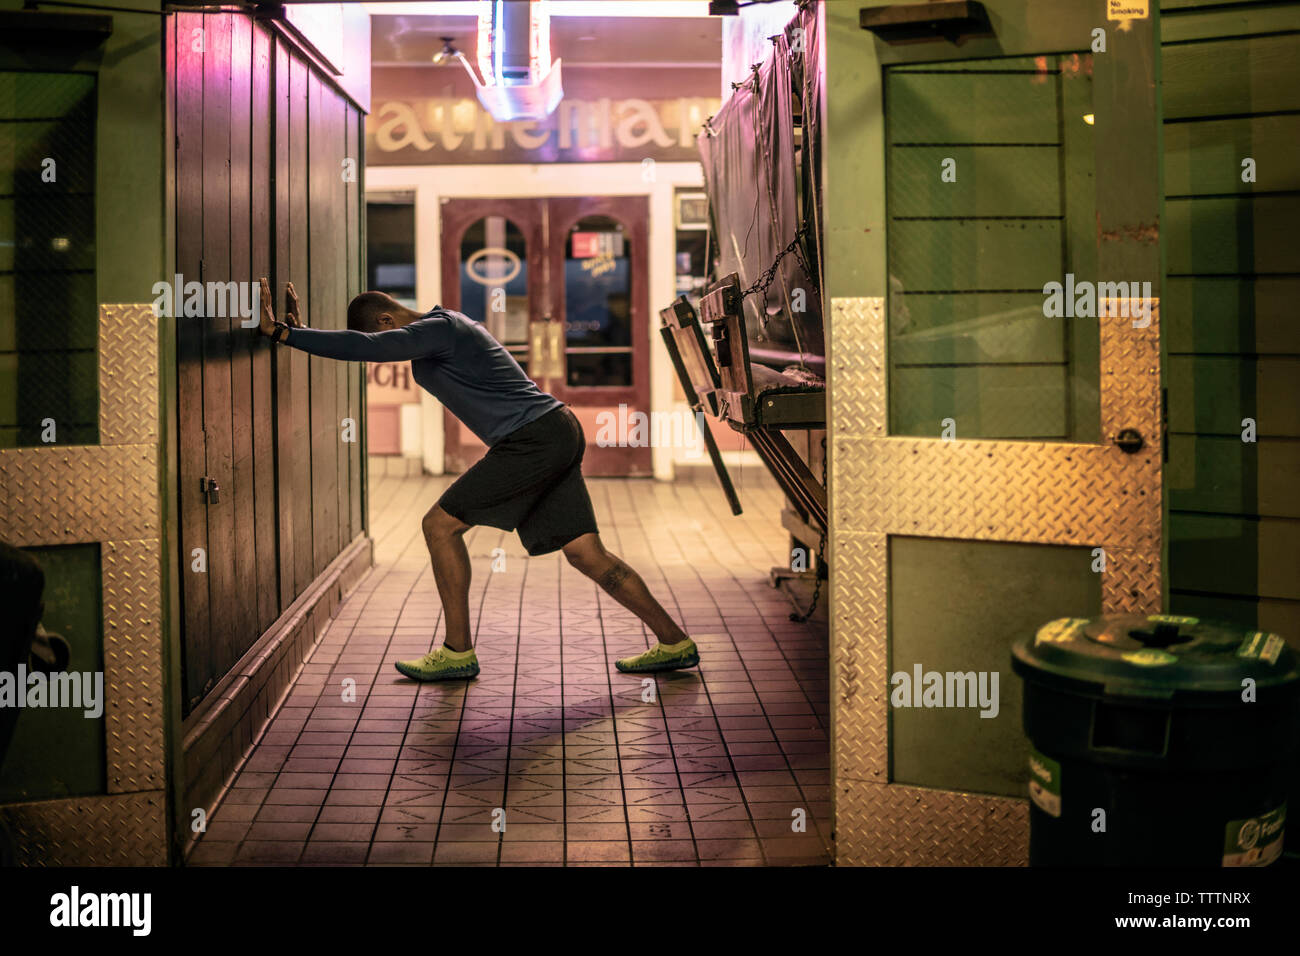 Man exercising at passage with store in background Stock Photo